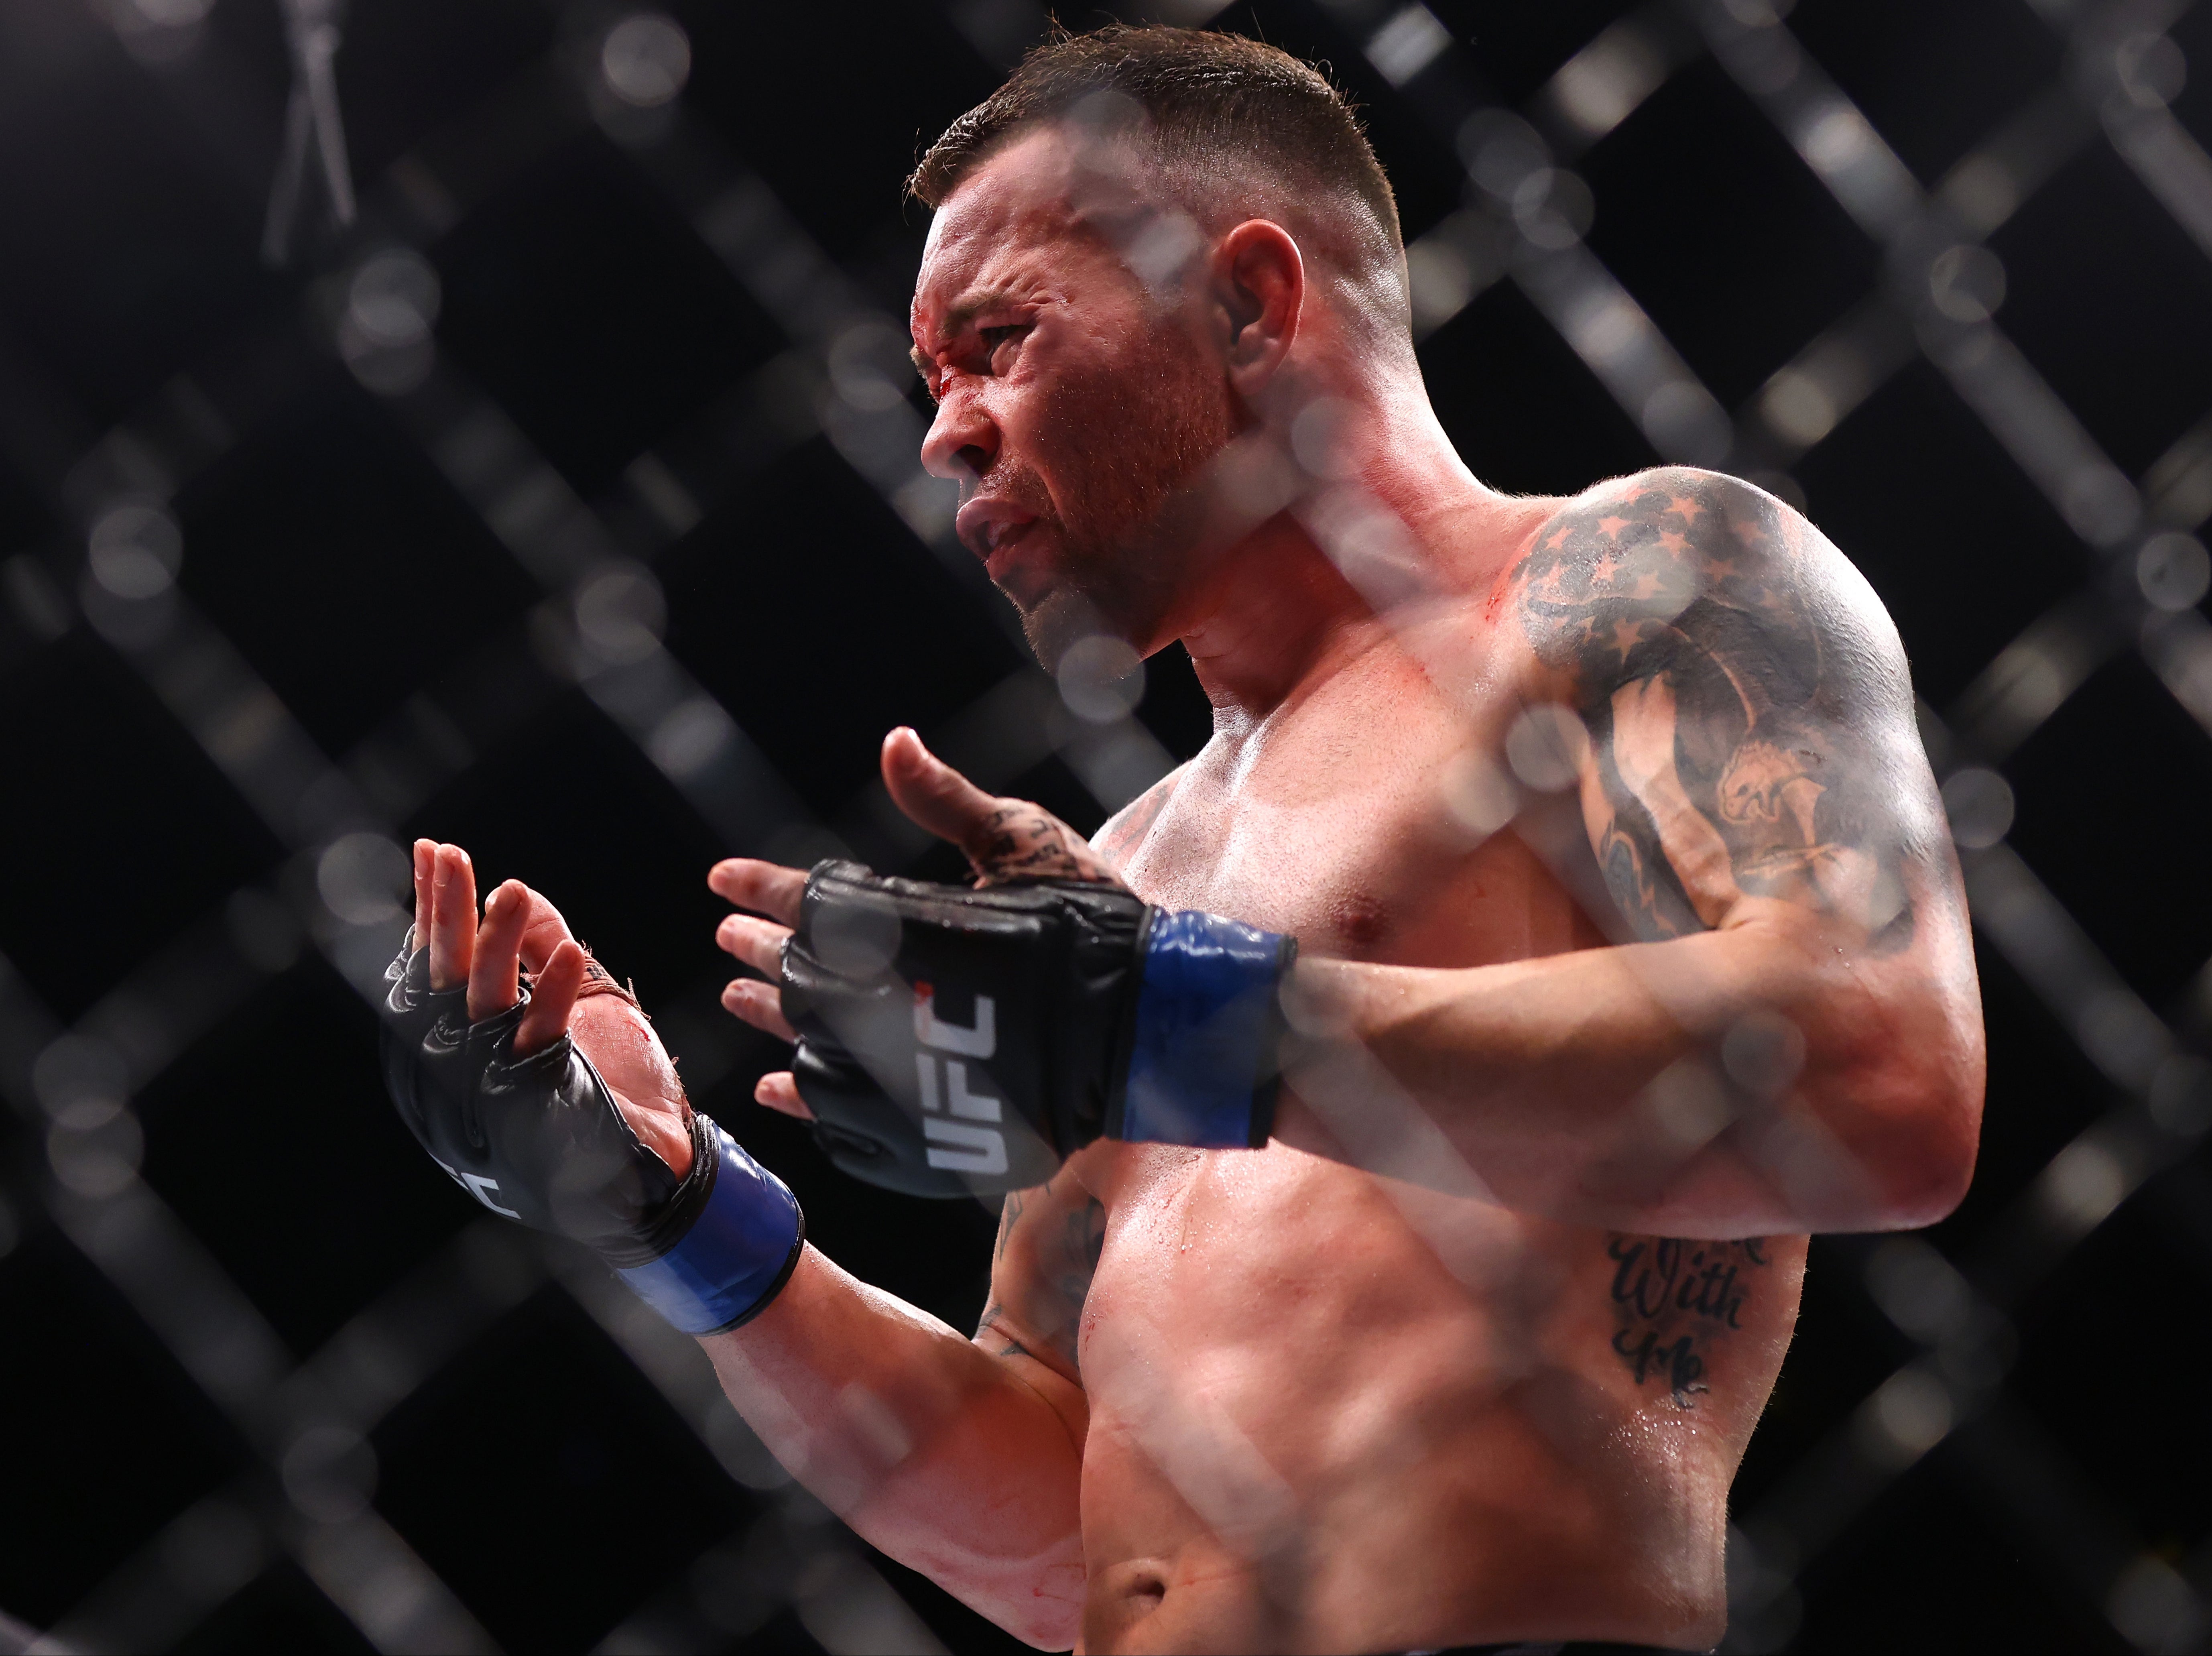 Colby Covington was allegedly assaulted by UFC rival Jorge Masvidal this week